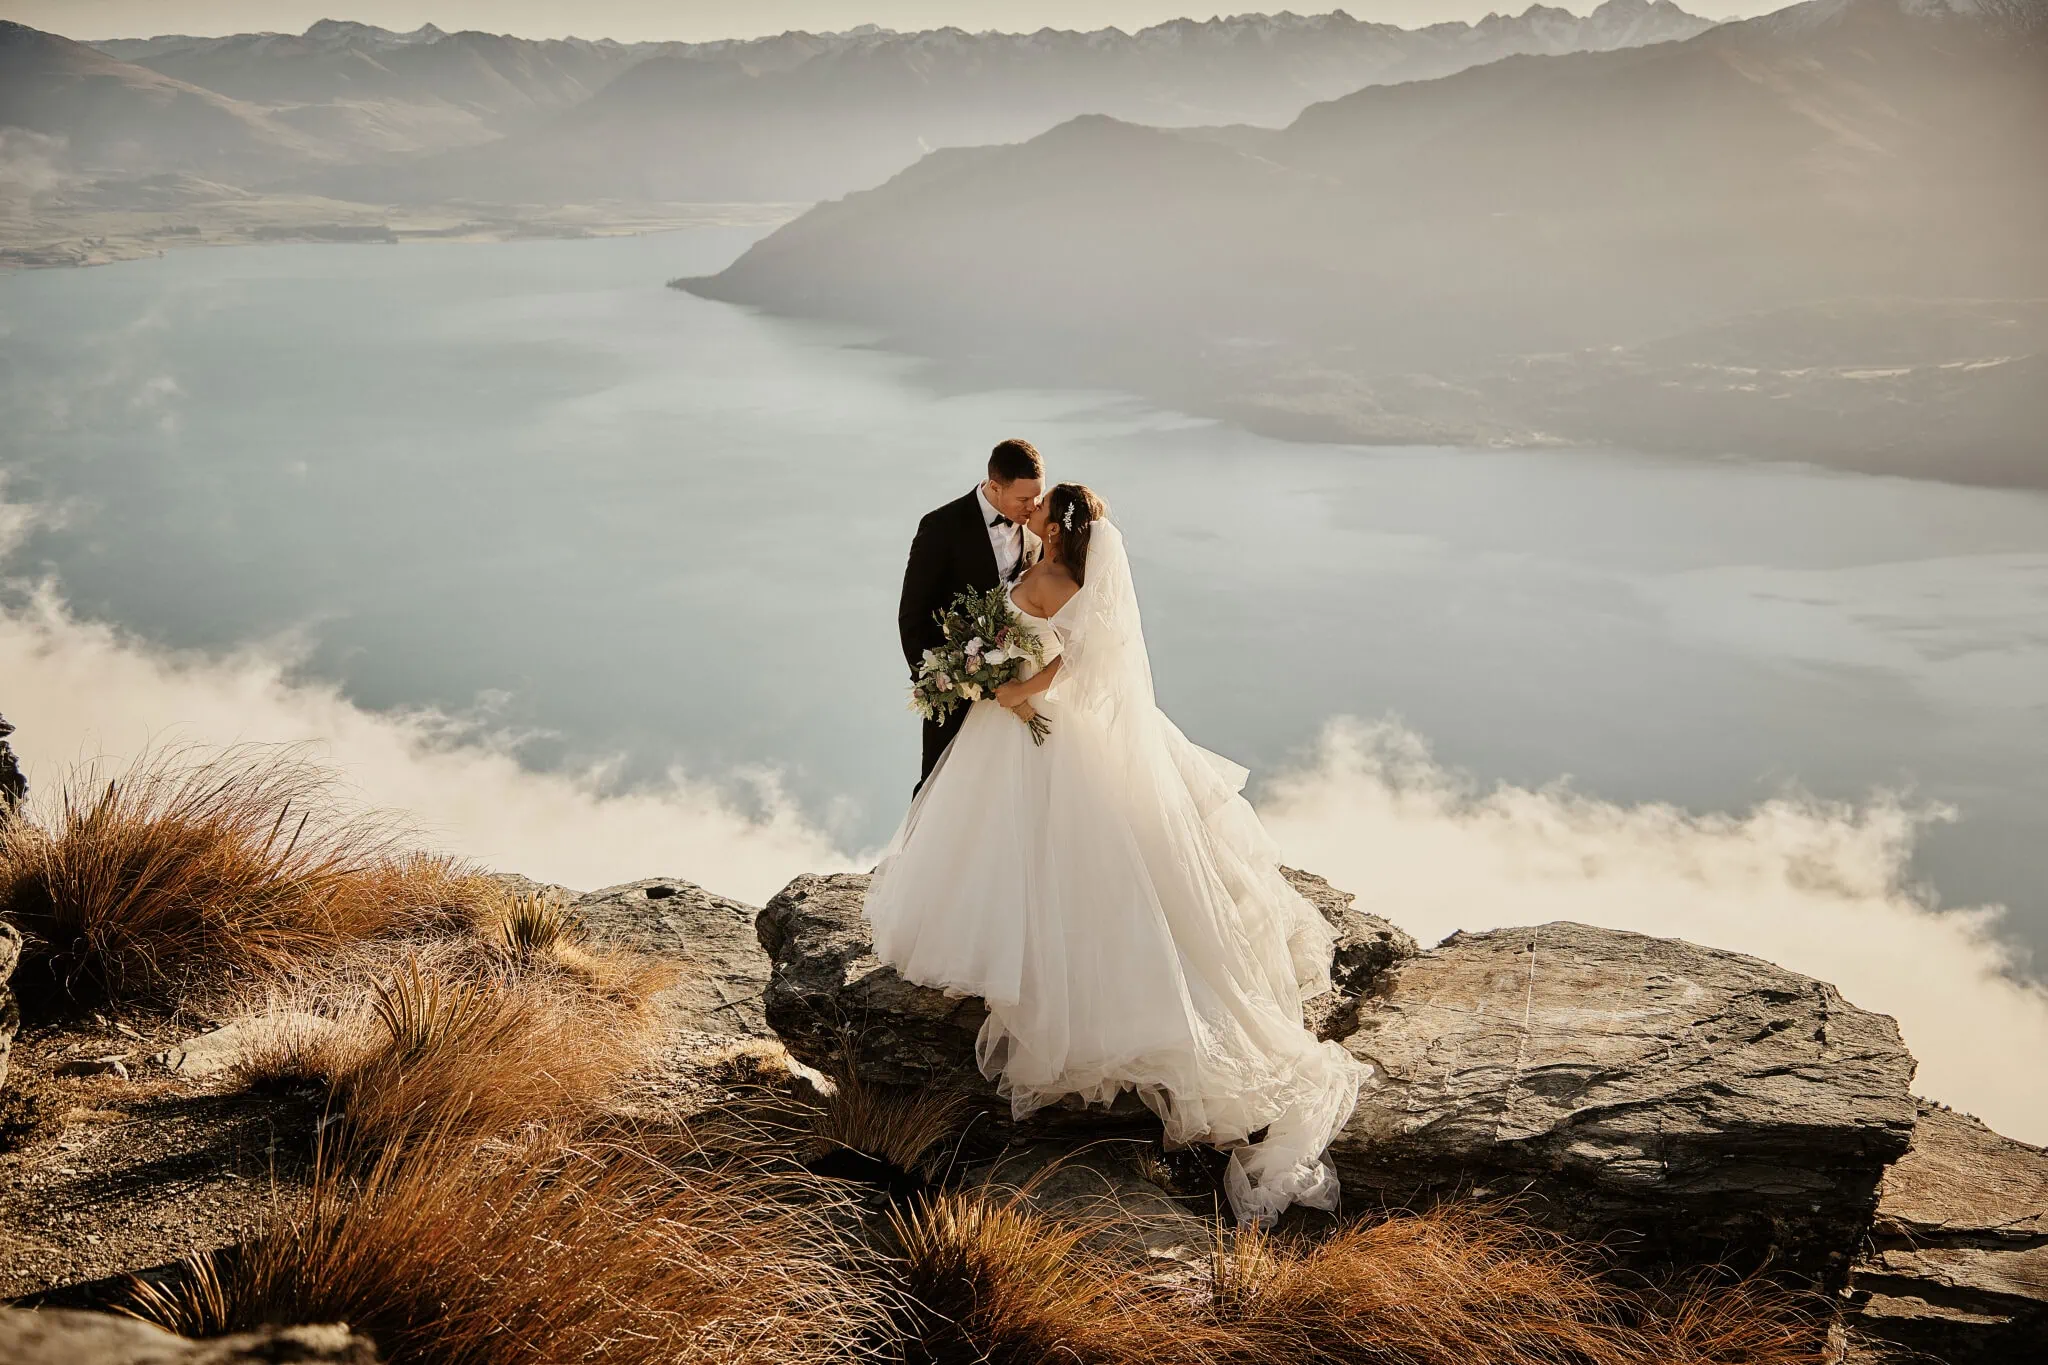 Queenstown New Zealand Elopement Wedding Photographer - Amy and Callum, a bride and groom, posing on a mountaintop during their Queenstown Heli Pre Wedding Shoot.